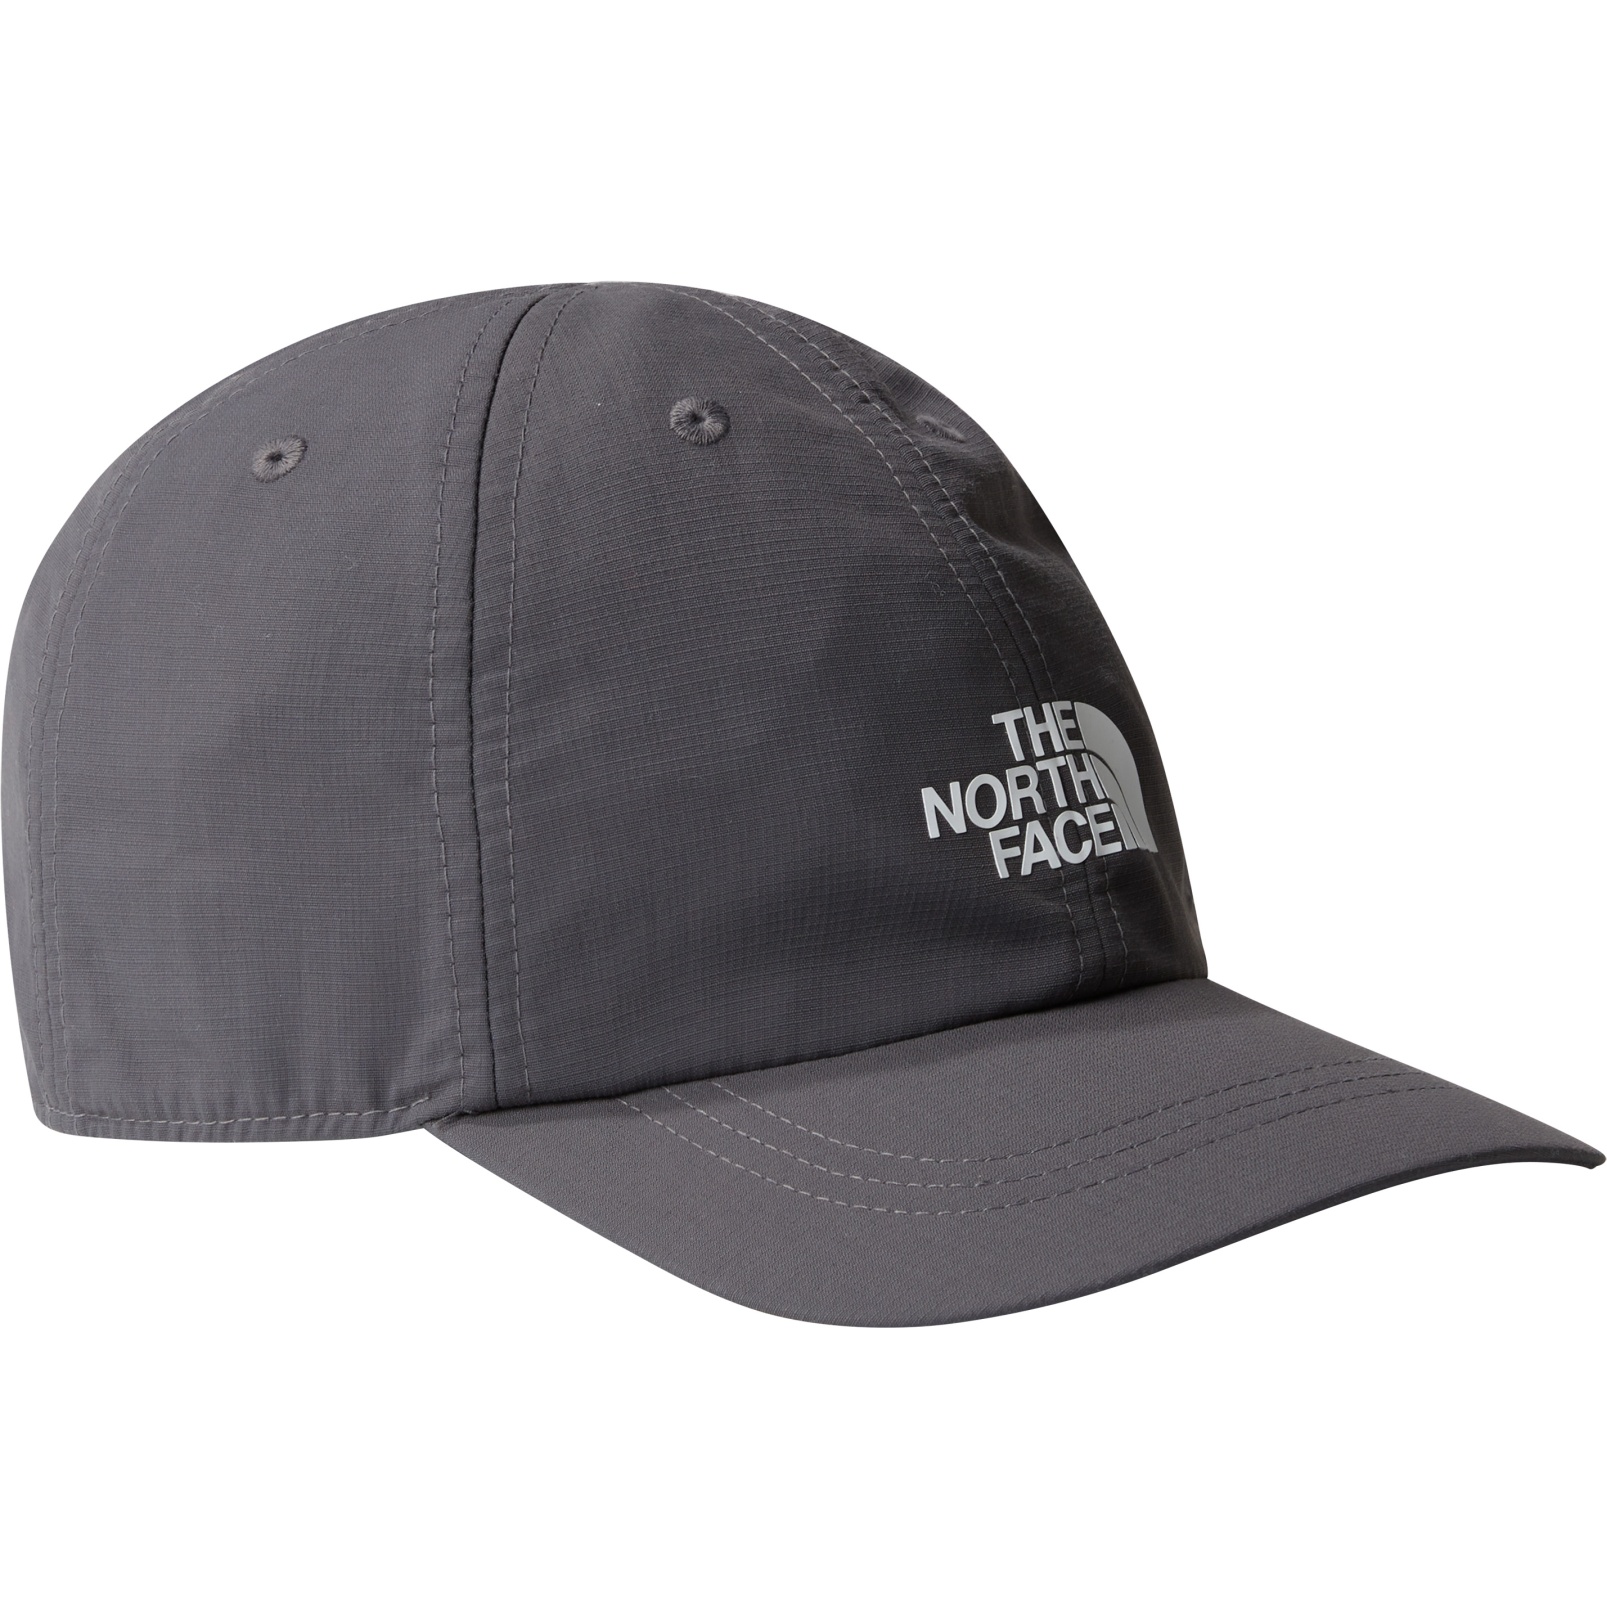 Picture of The North Face Horizon Hat - Anthracite Grey